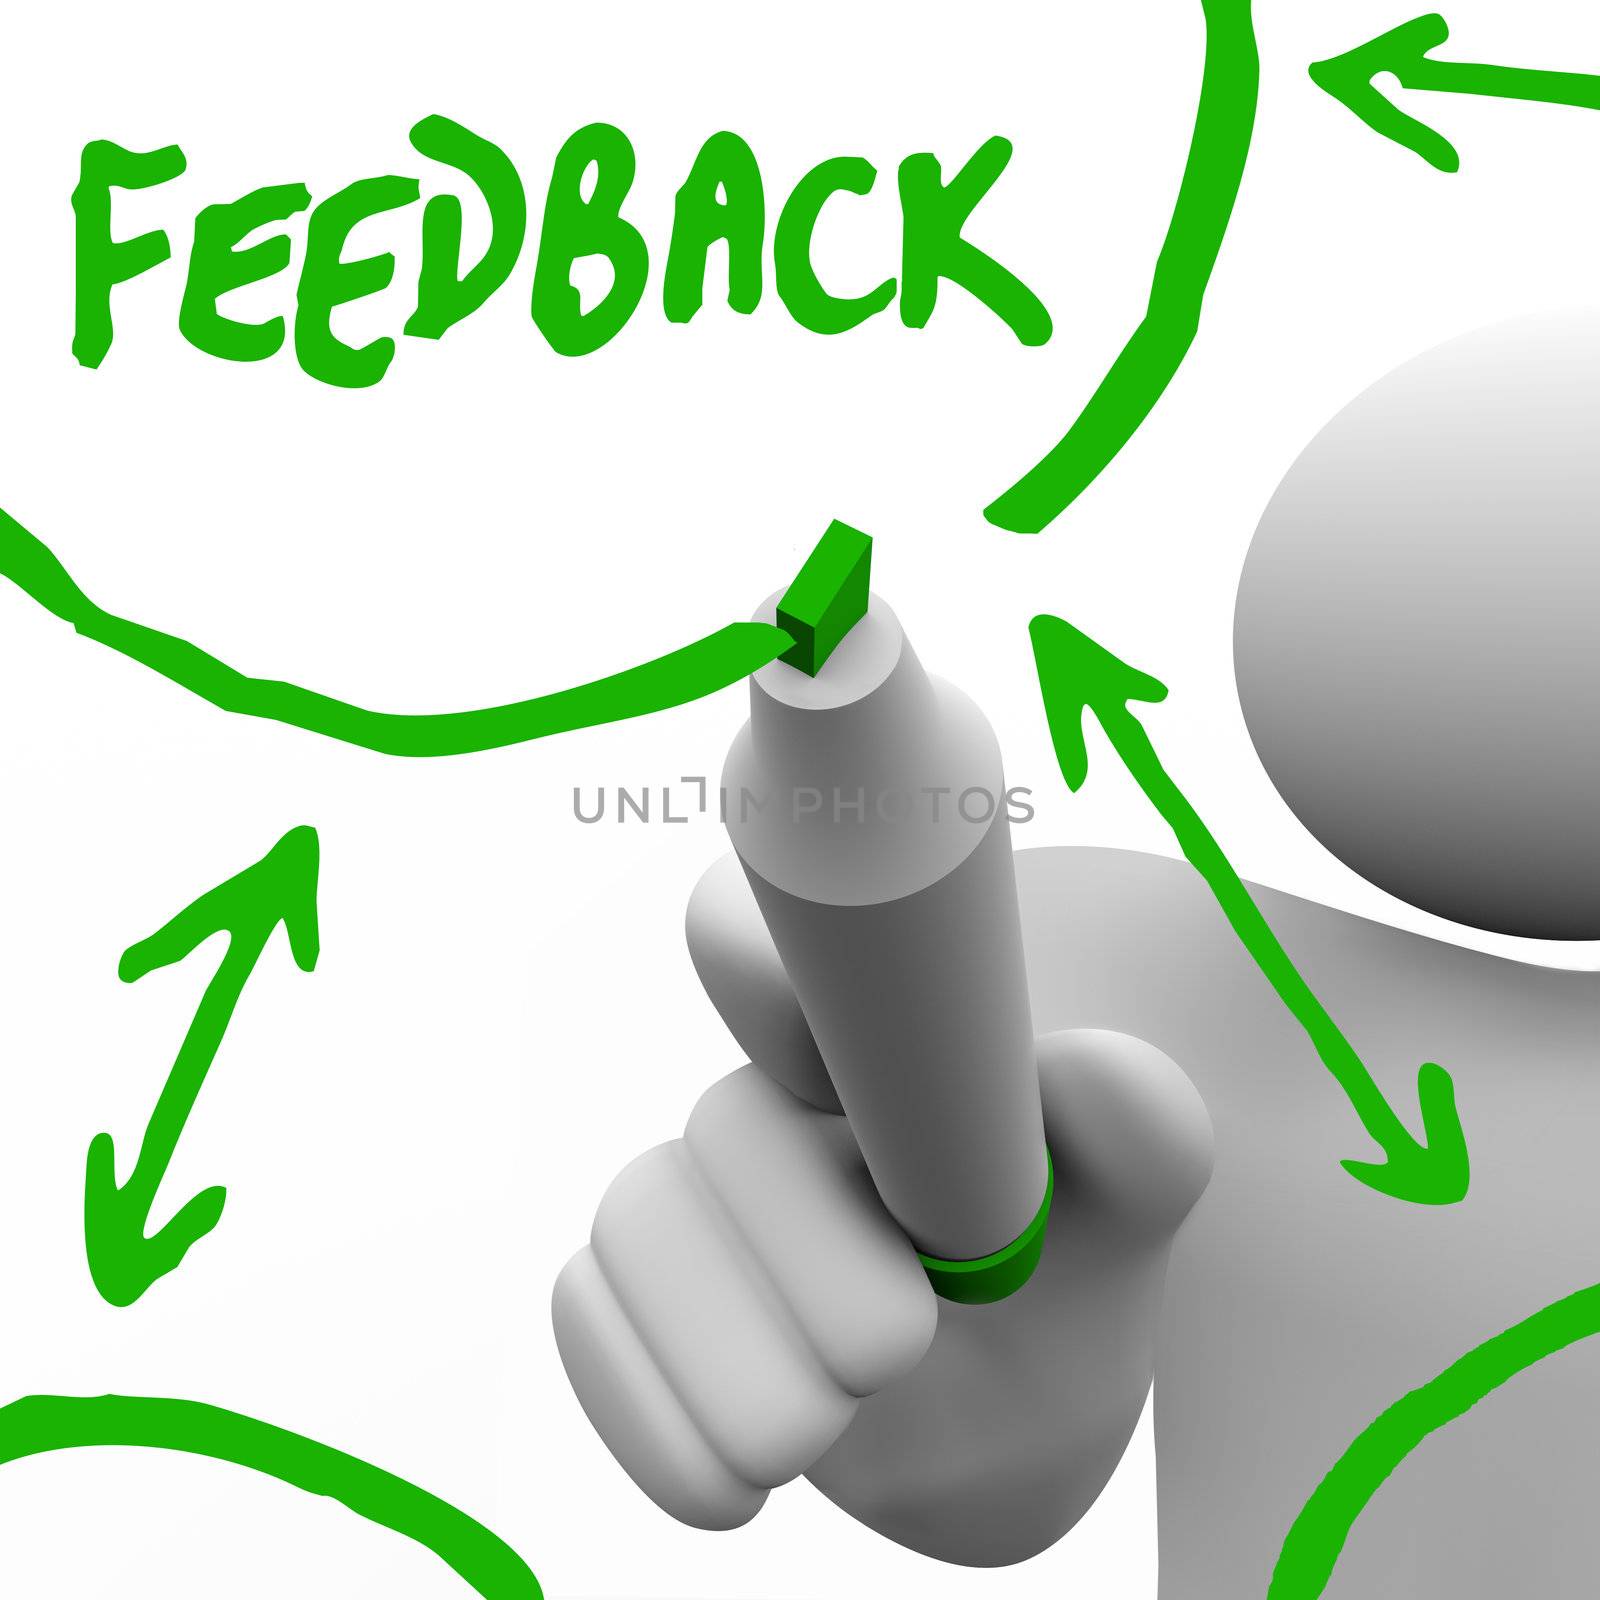 Feedback - Recording Input from Others for Improvement by iQoncept